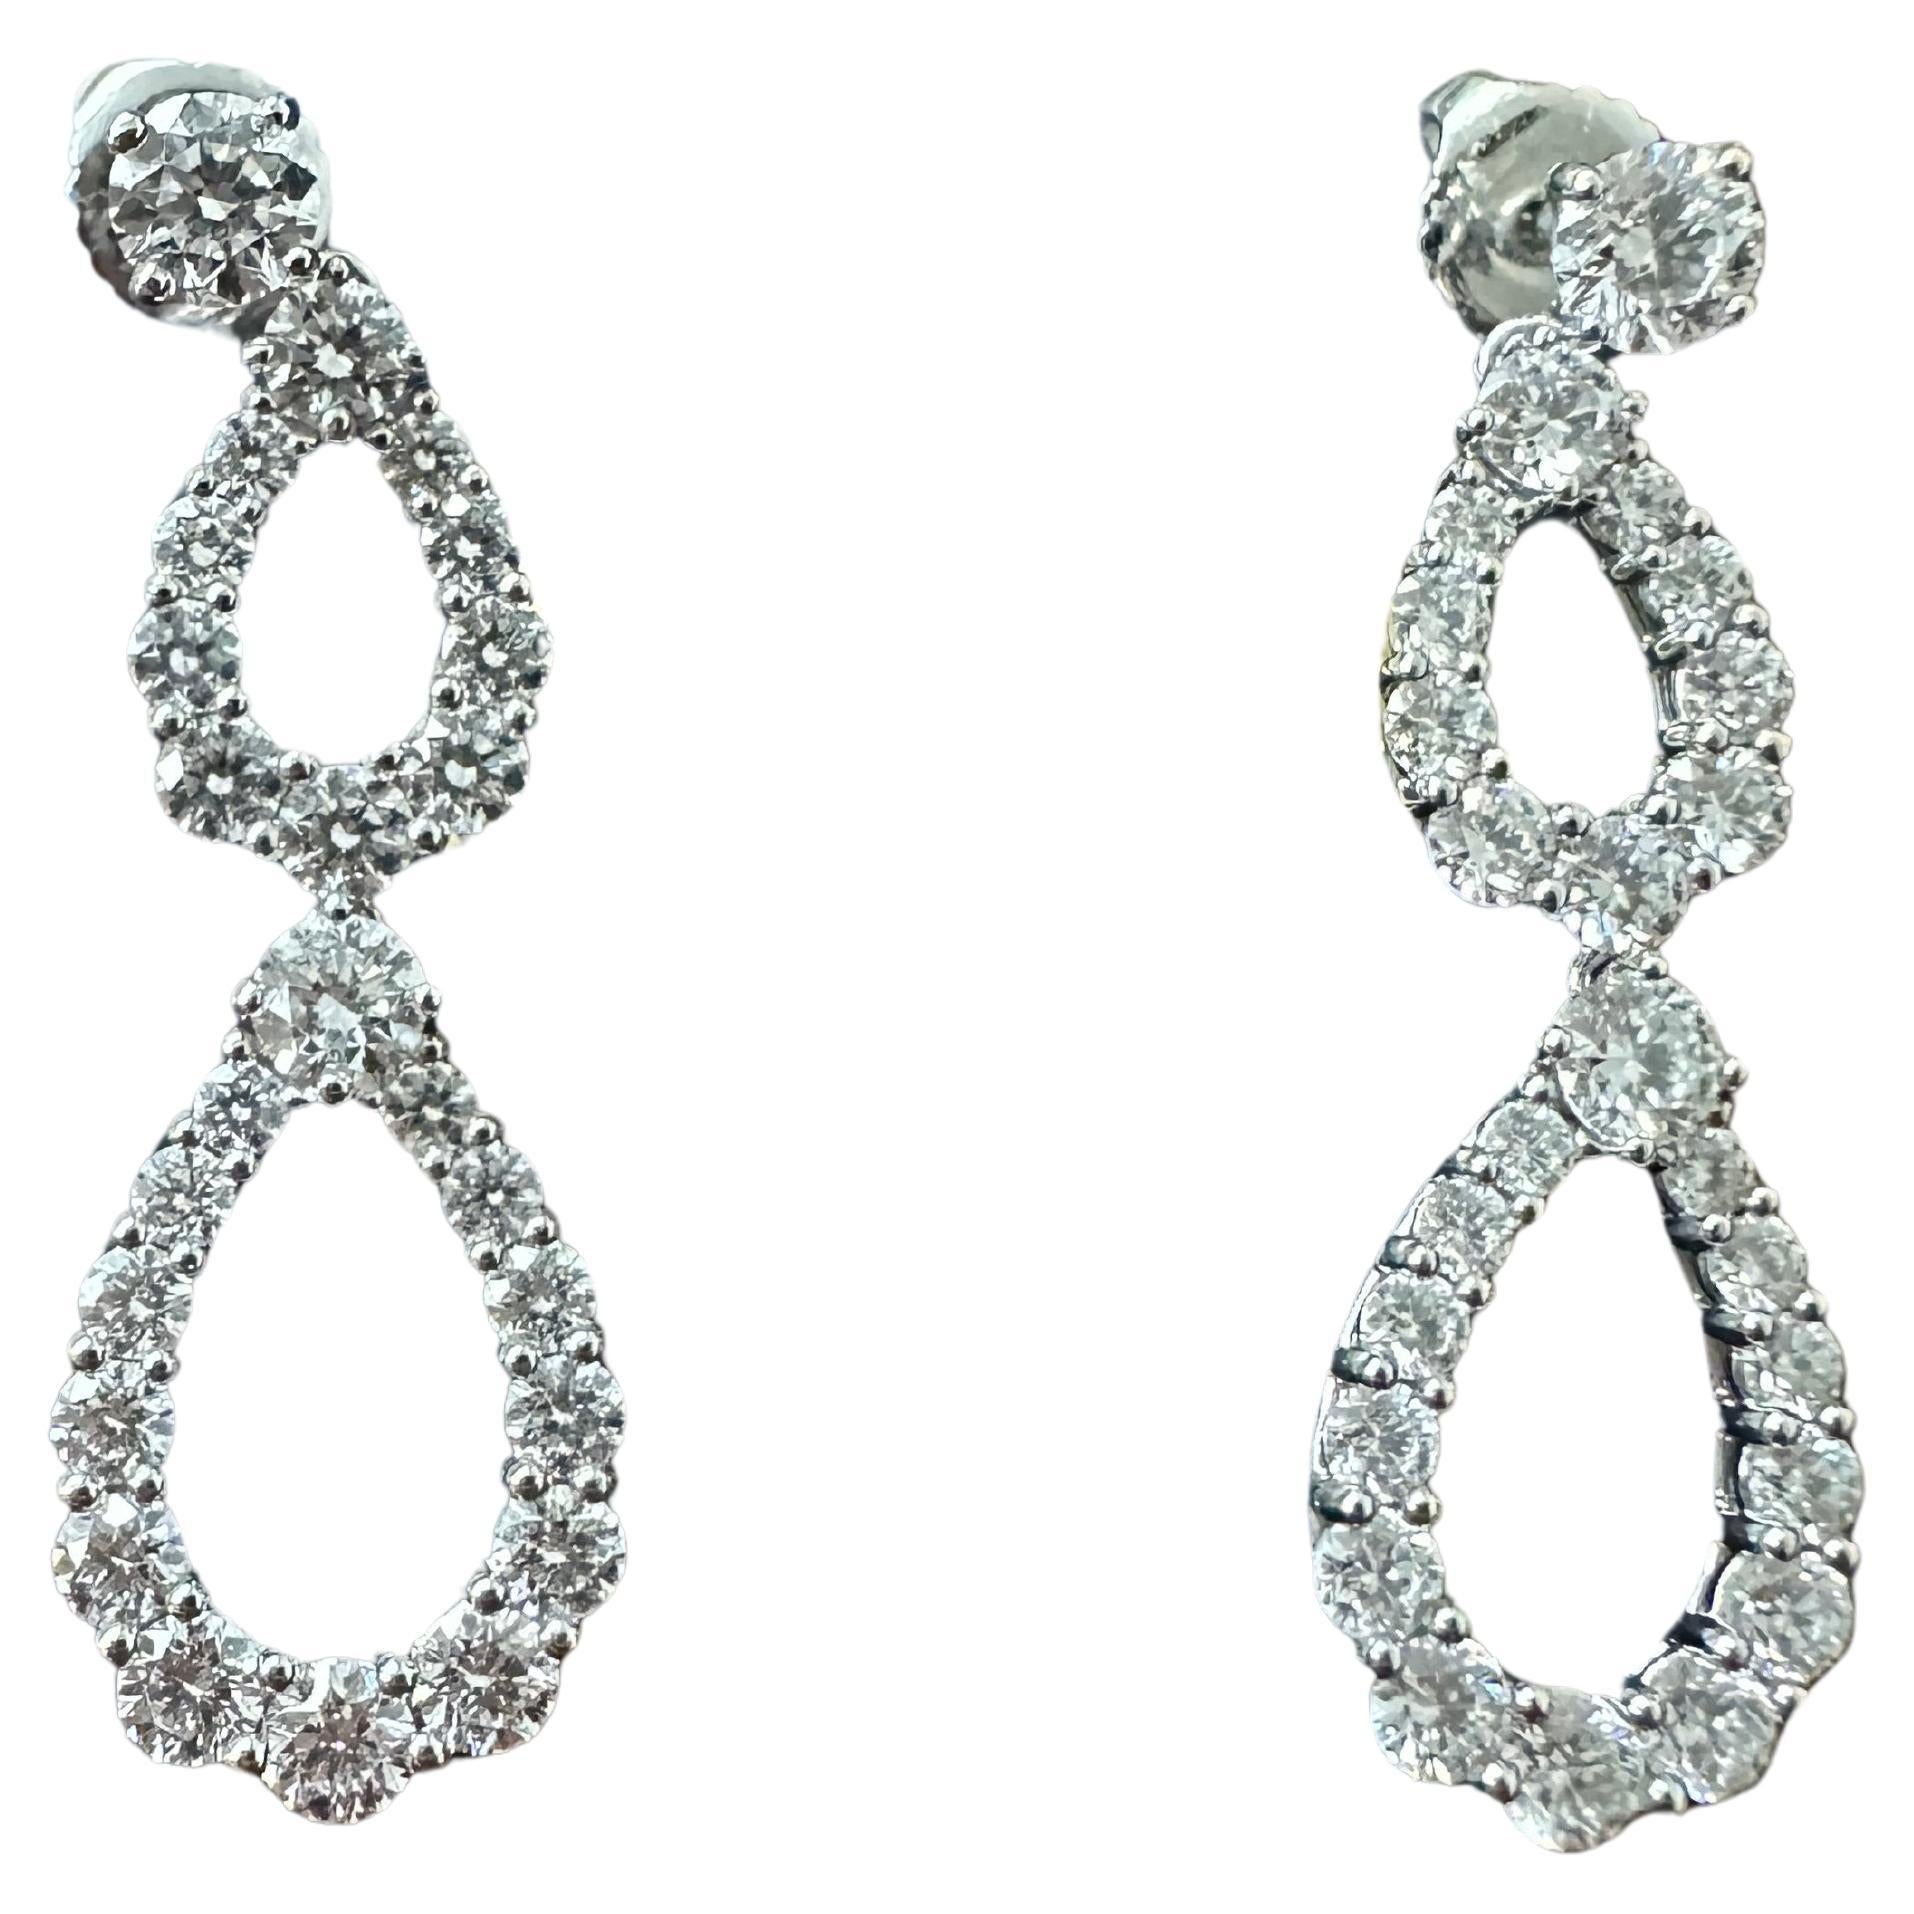 Harry Winston Double Diamond Loop Earrings 
PT950
7,12 gr 
Diamonds are approx. 2.60 cttw, D-F / VS
Length 1 1/4 
Retails for: over $22,400 
Excellent condition , no defects , gently worn 
Come with the original box and service documents from Harry